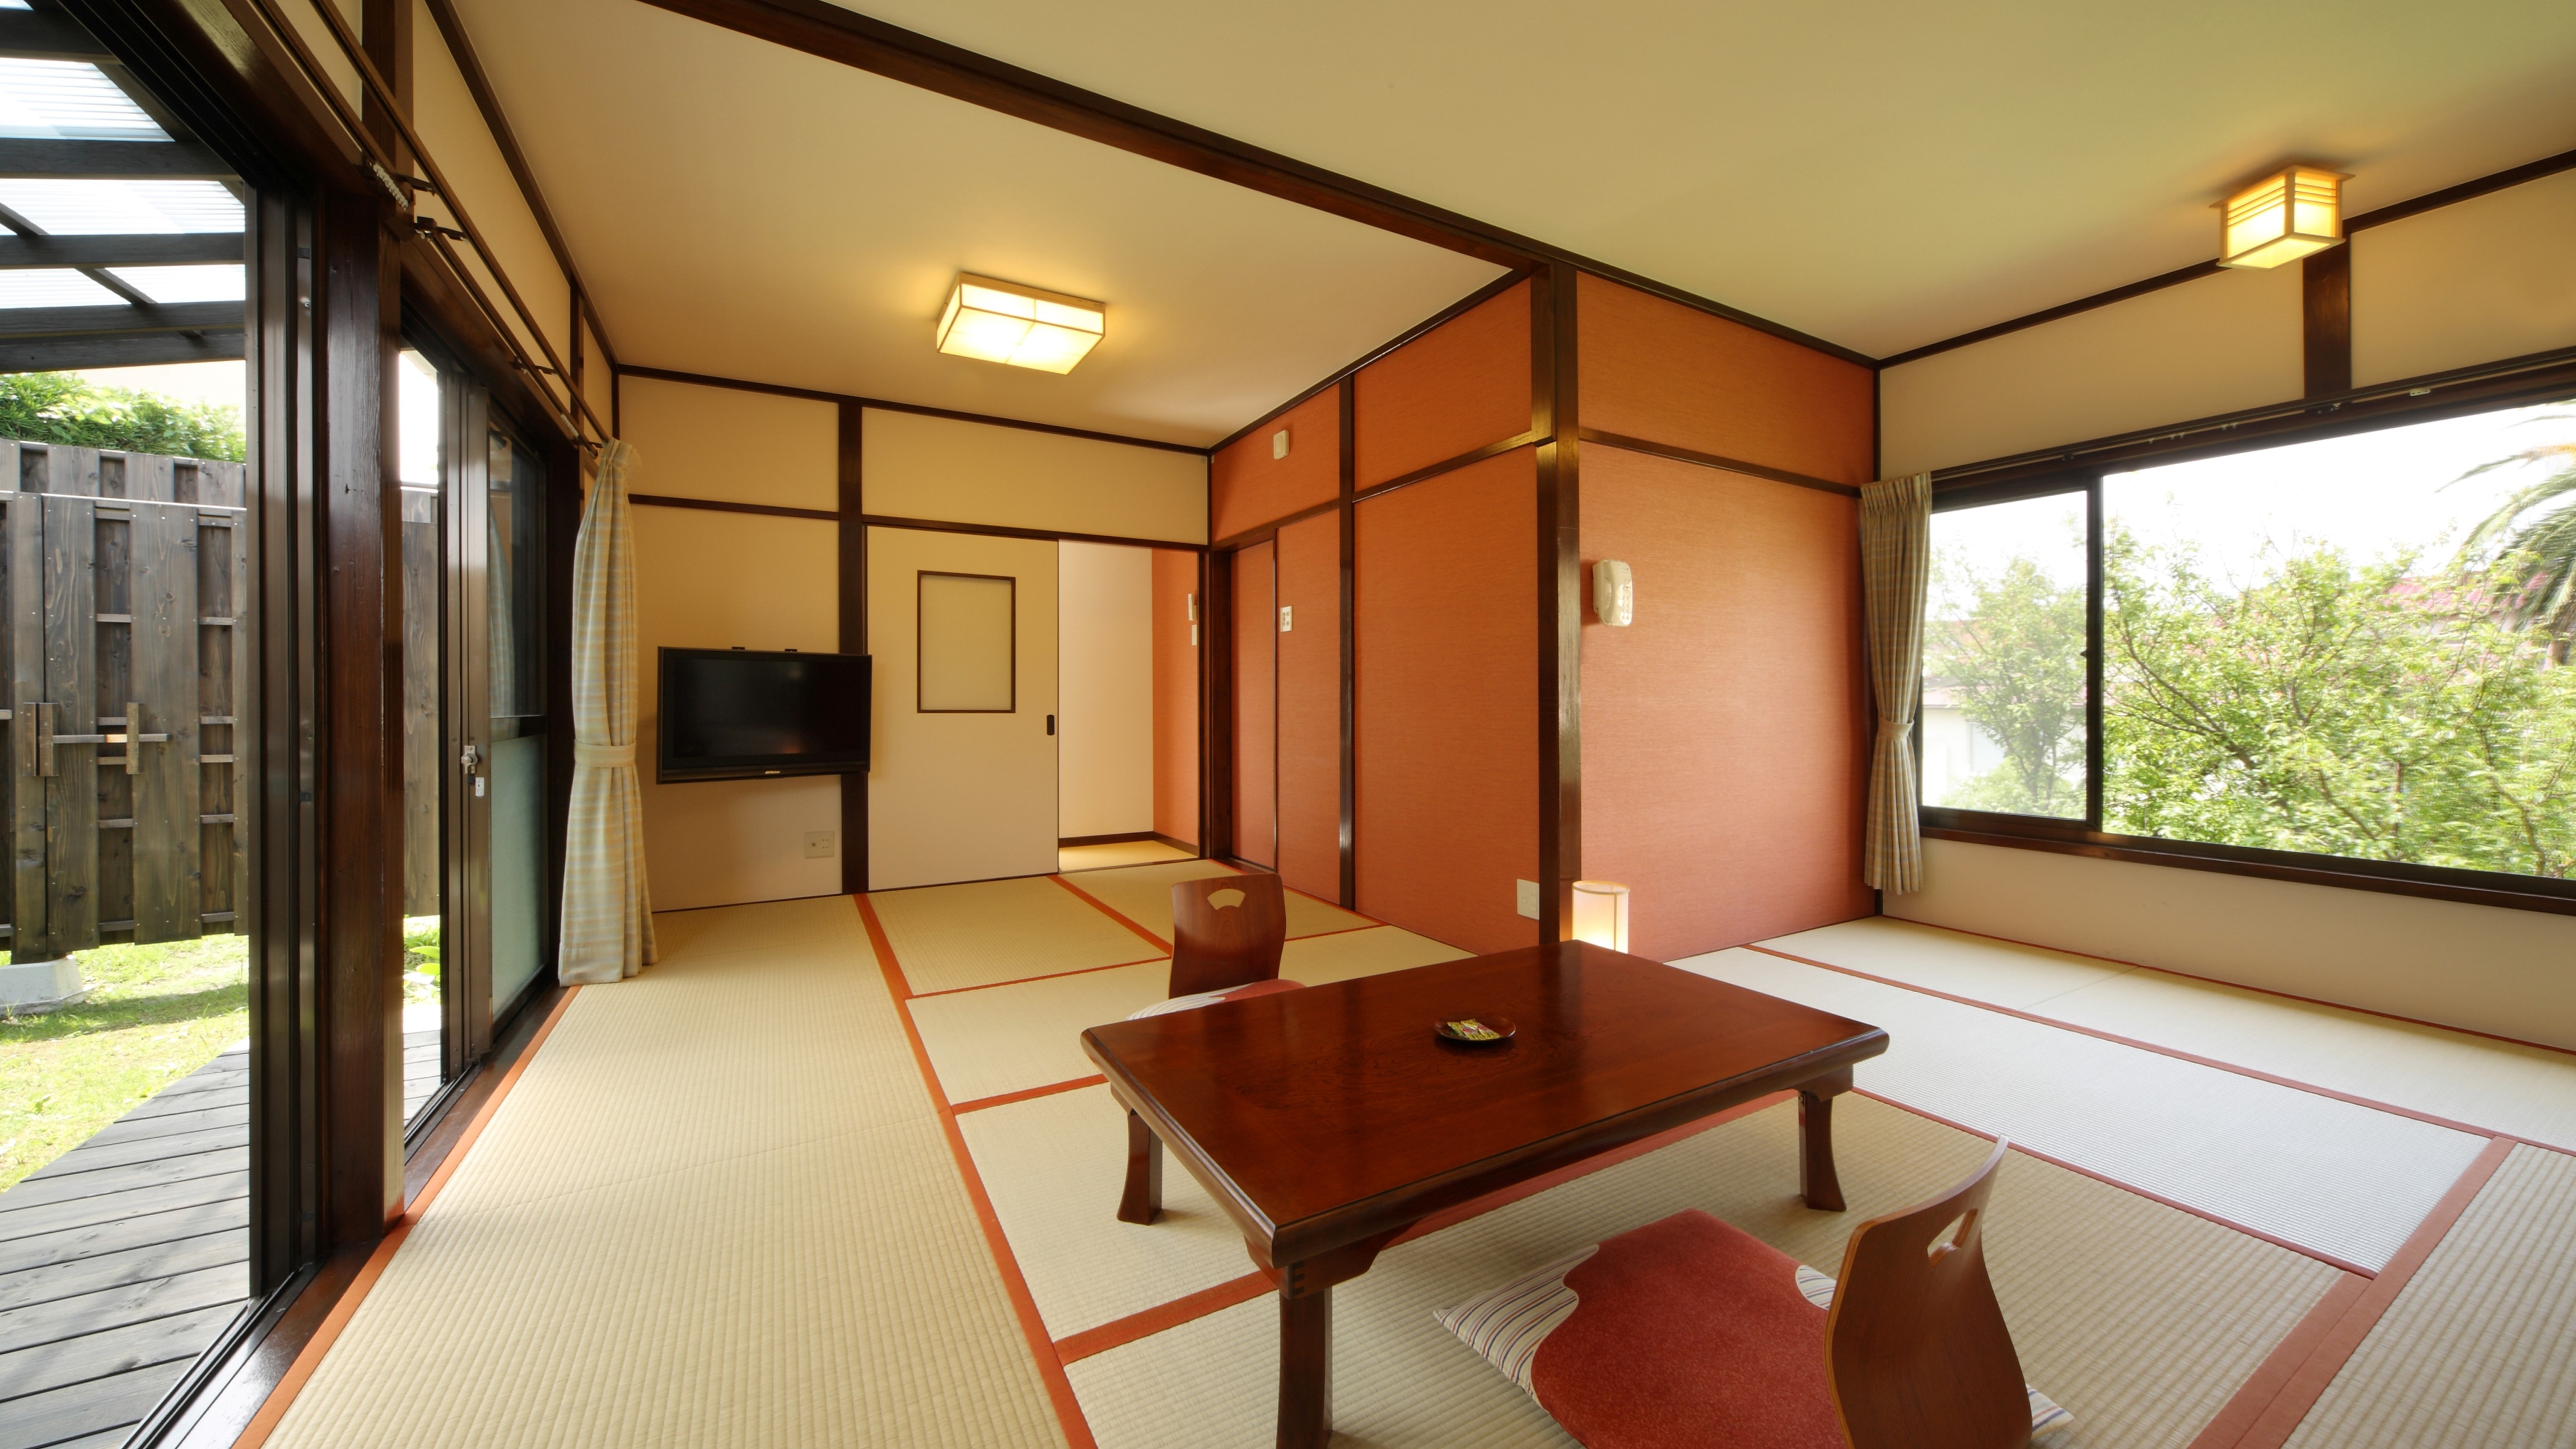 Separate Japanese-style room 12 tatami mats Example: Wallpaper varies depending on the room